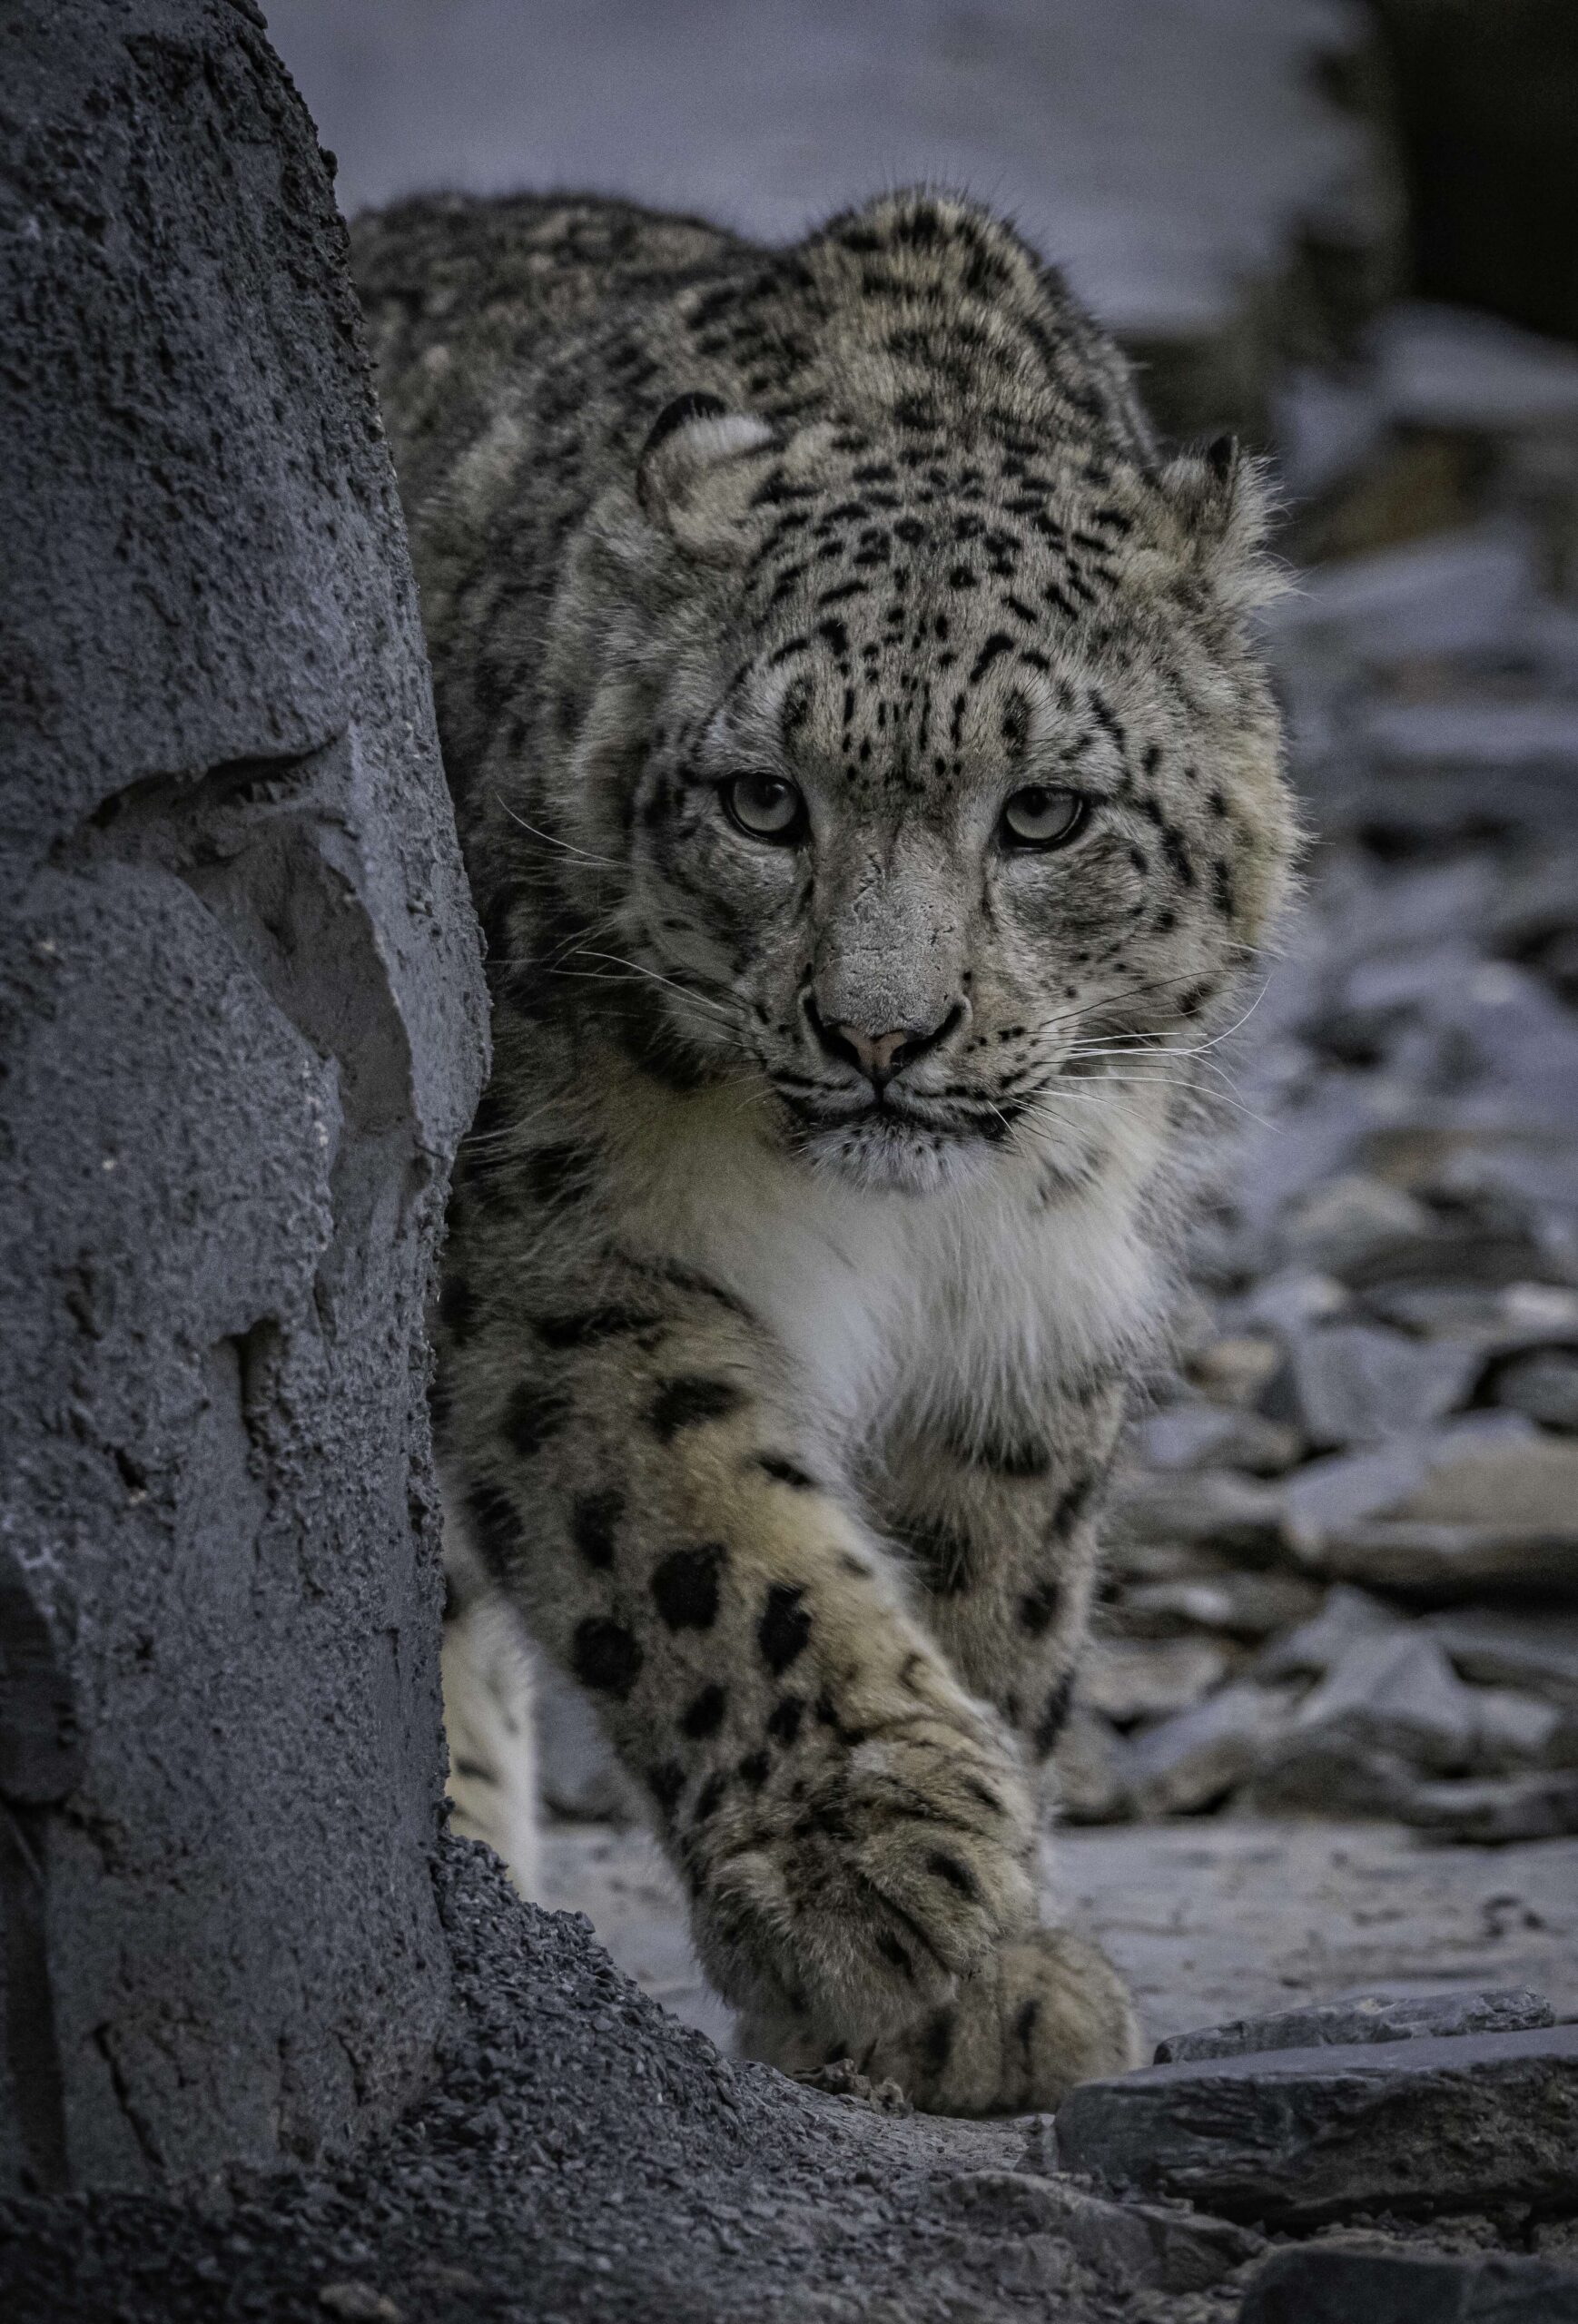 Yashin and Nubra, a pair of snow leopards, have arrived at Chester Zoo. 